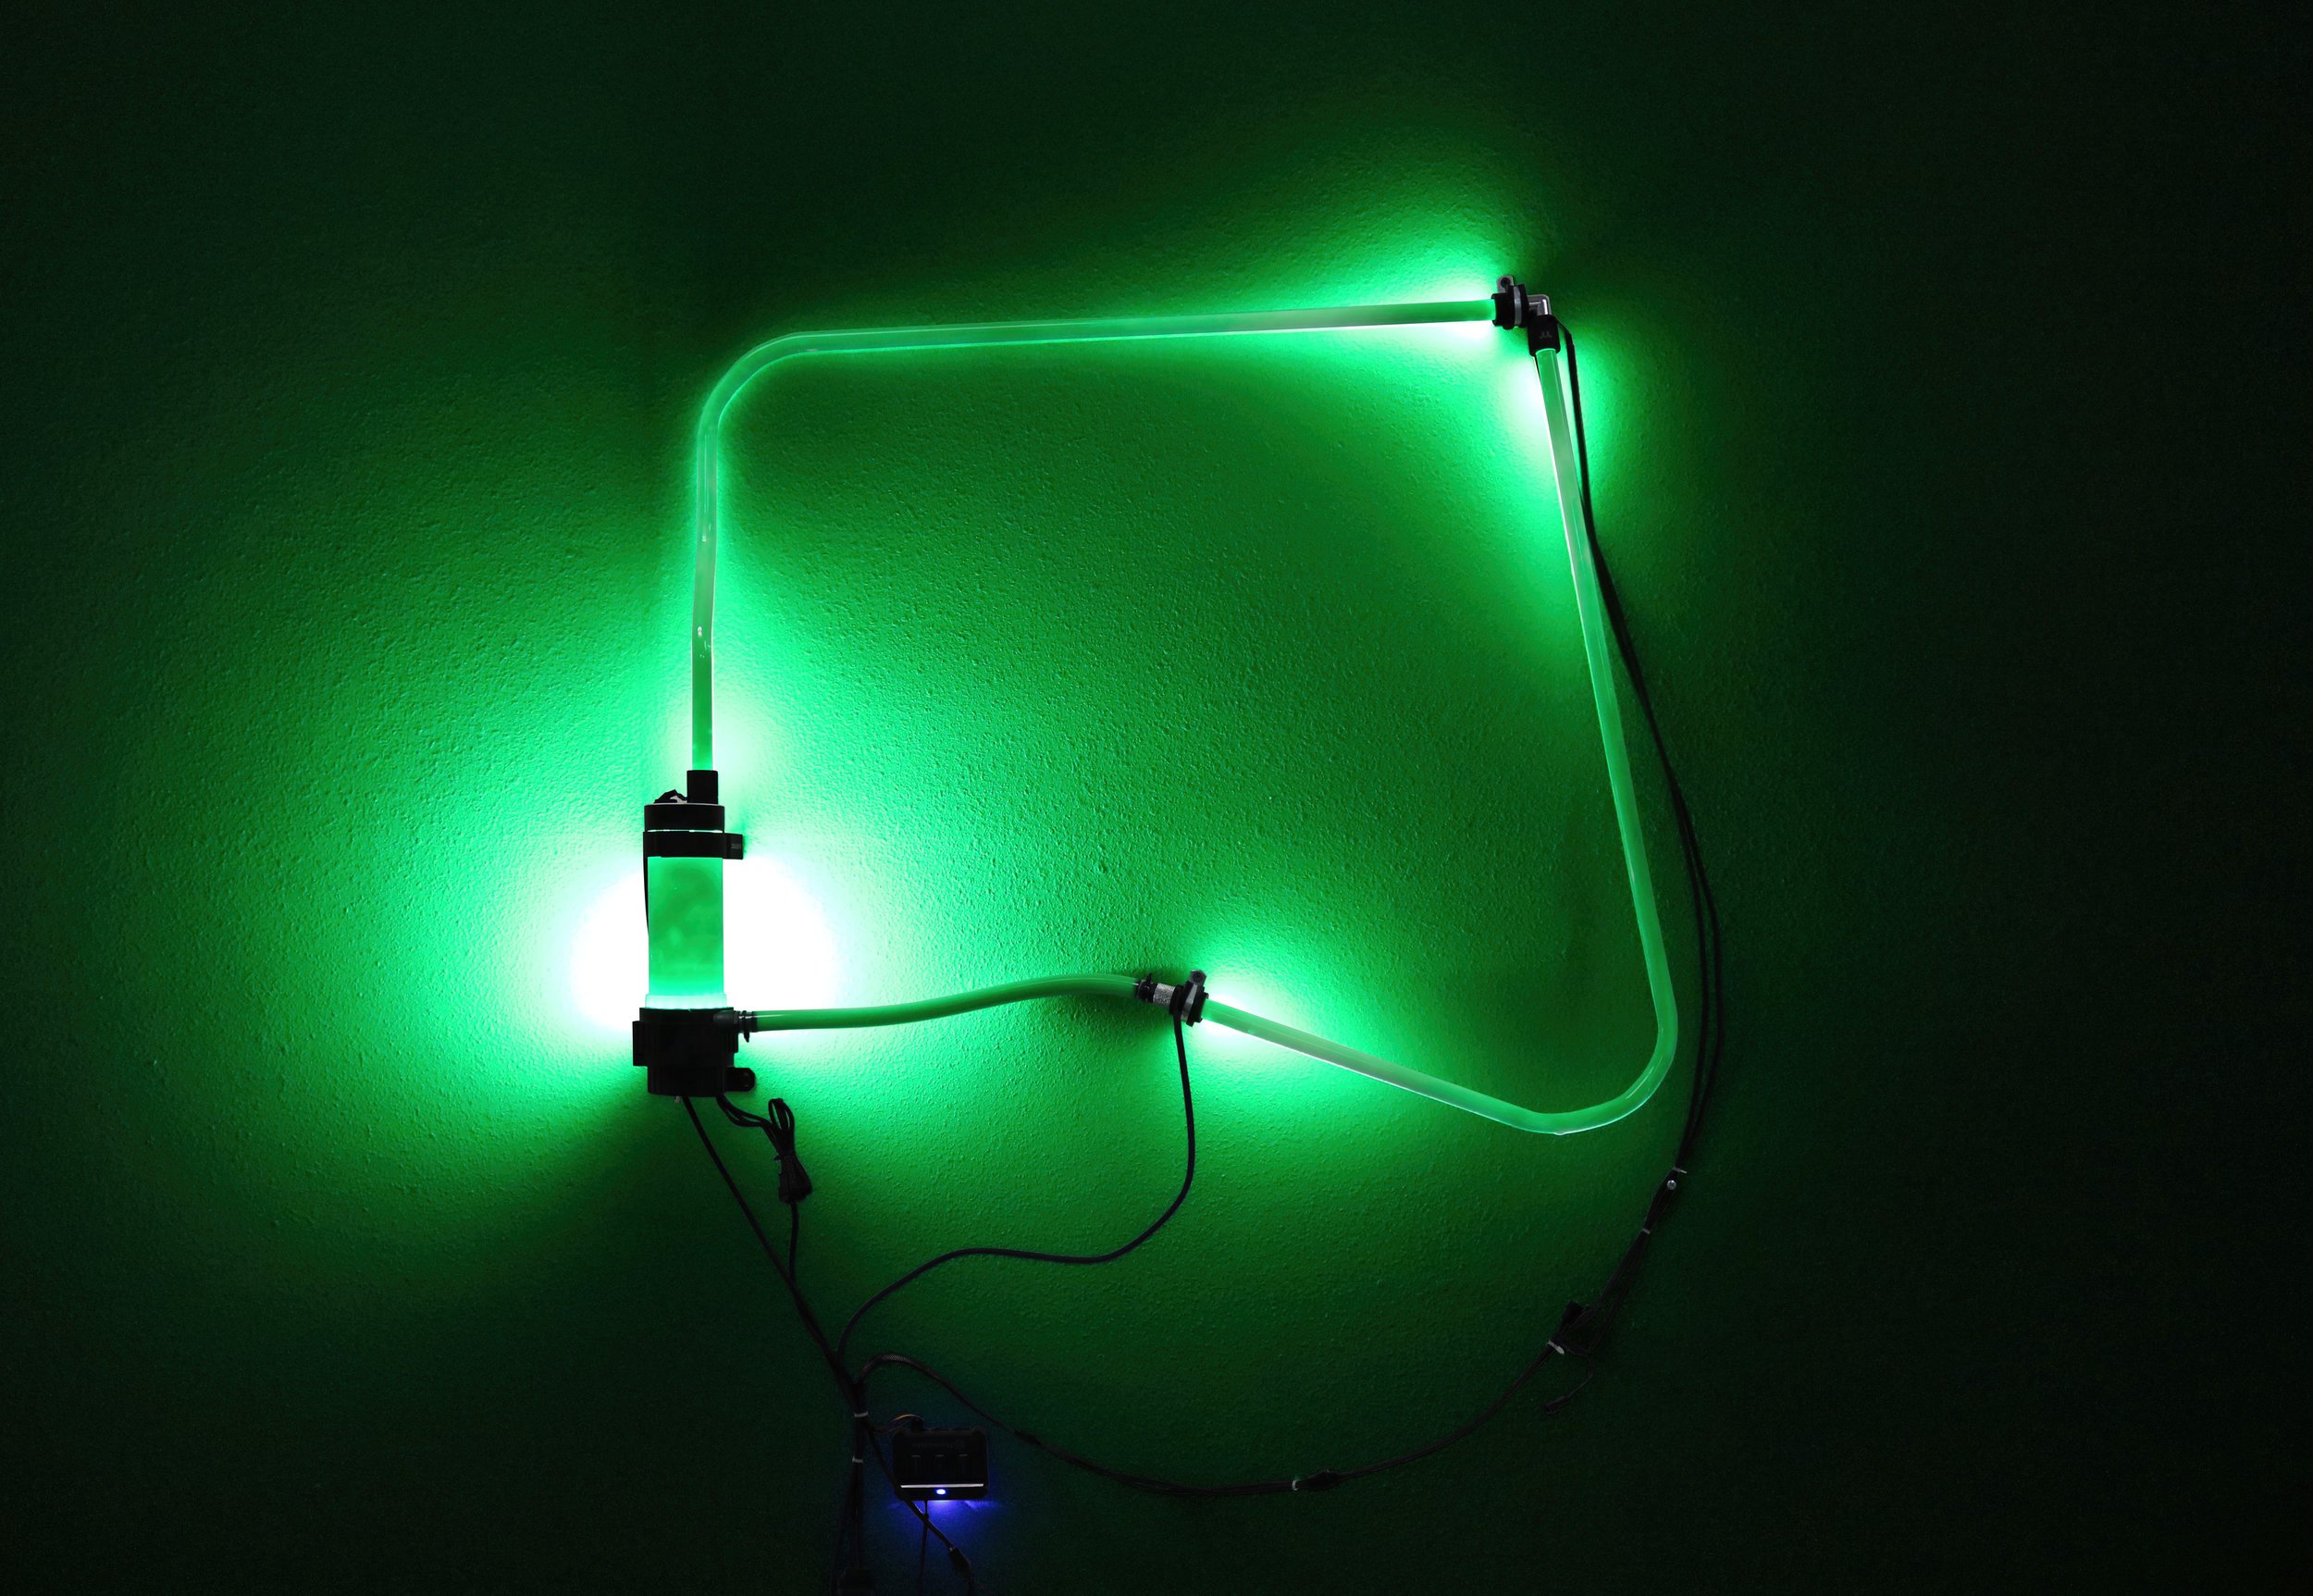  Filip Kostic,  Closed Loop (Green),  Heat-bent PETG tubing, LED compression fittings, pump and reservoir, computer power supply, 2017 